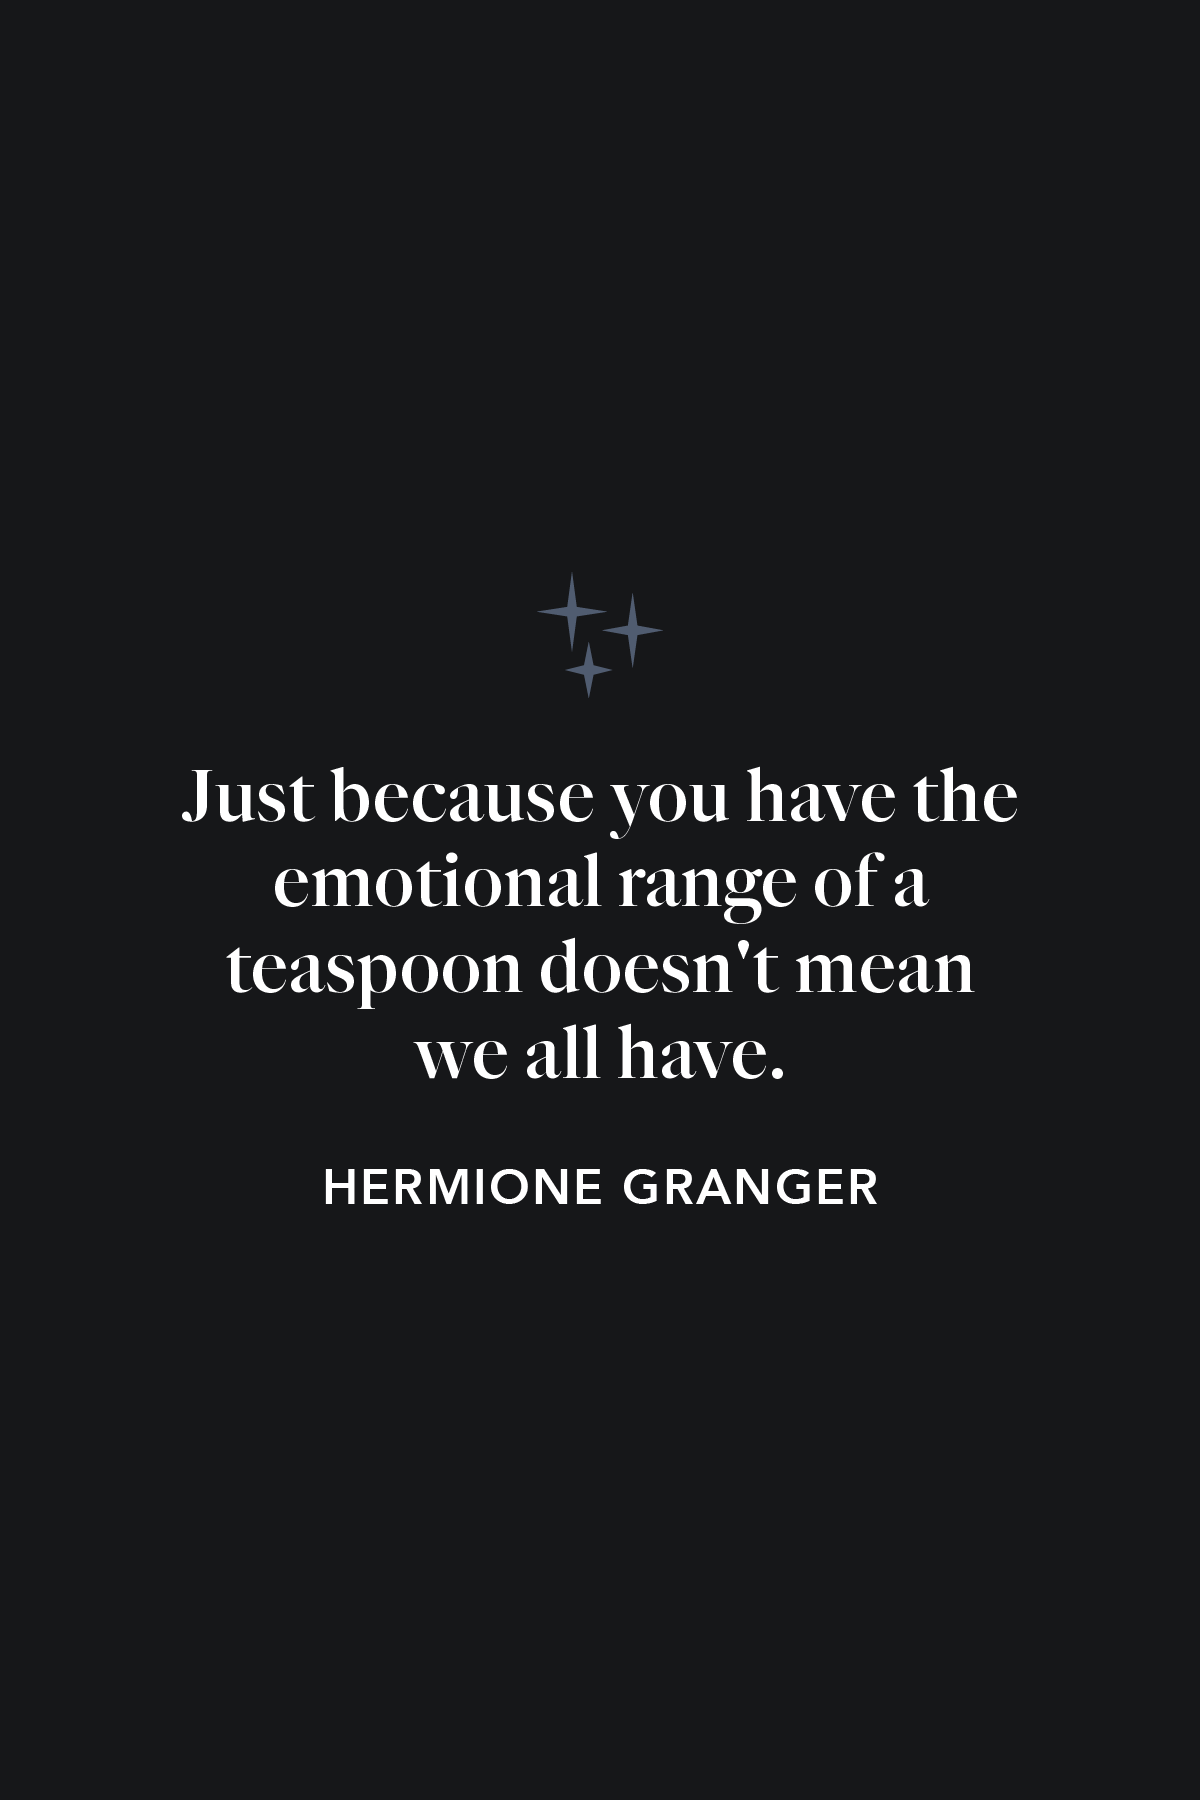 hermione granger quotes from the sorcerers stone